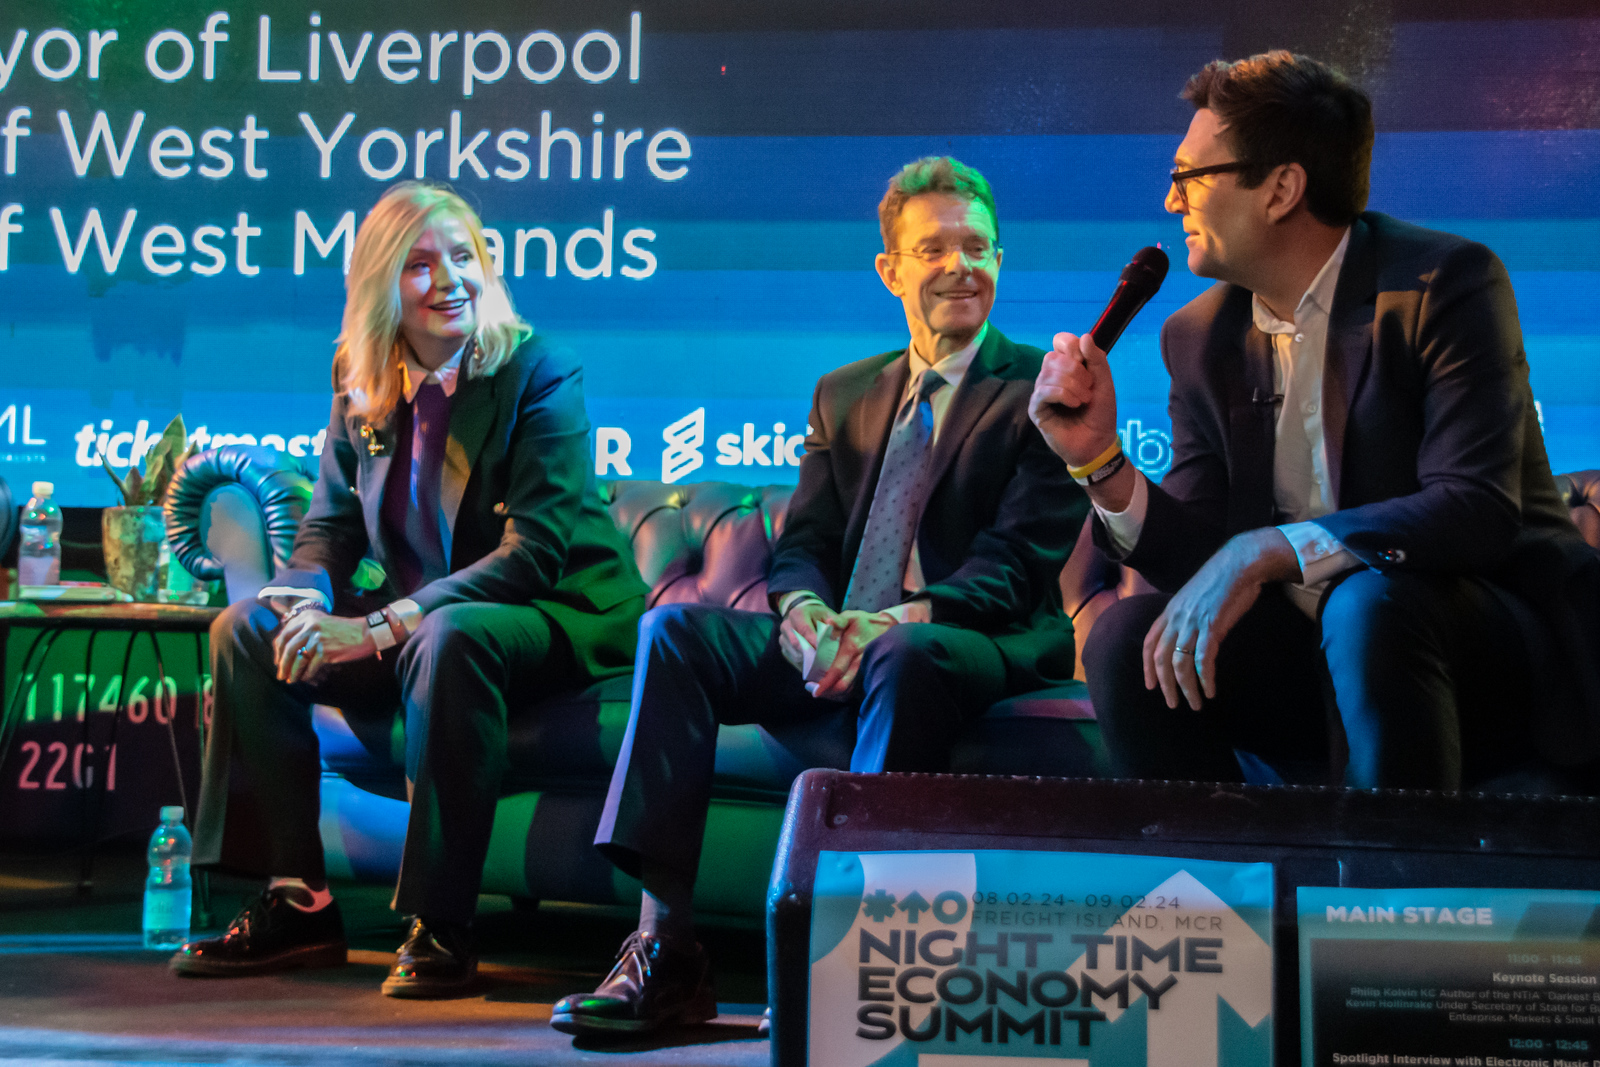 From L-R: Tracy Brabin, Mayor for West Yorkshire; Andy Street, Mayor for the West Midlands, and Andy Burnham, Mayor for Greater Manchester, pictured at the Night Time Economy Summit in Manchester.